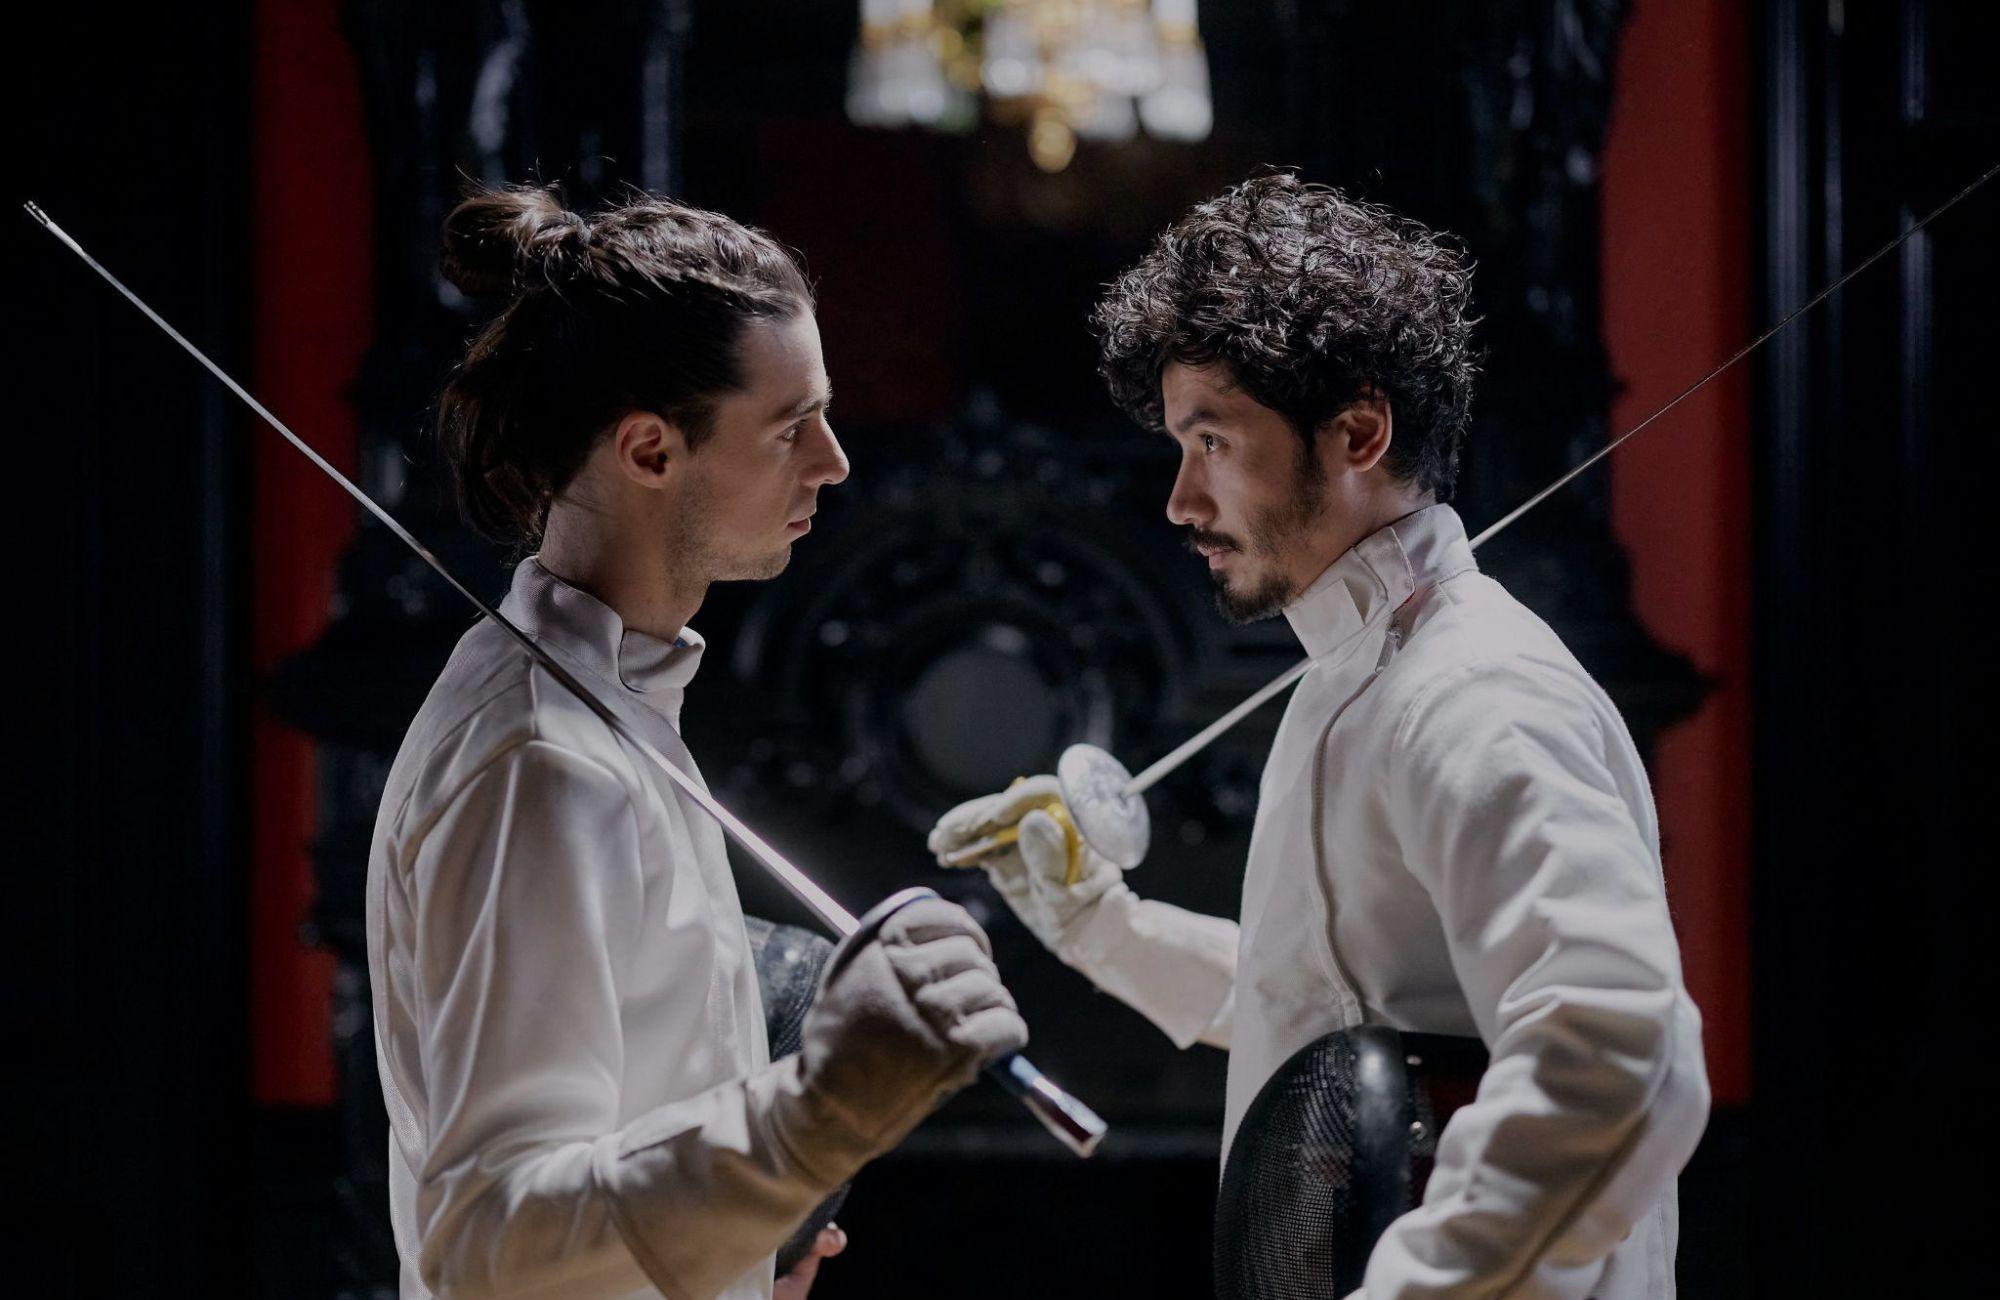 An allegorical image featuring two fencing partners that represent covid's clash of ideologies.